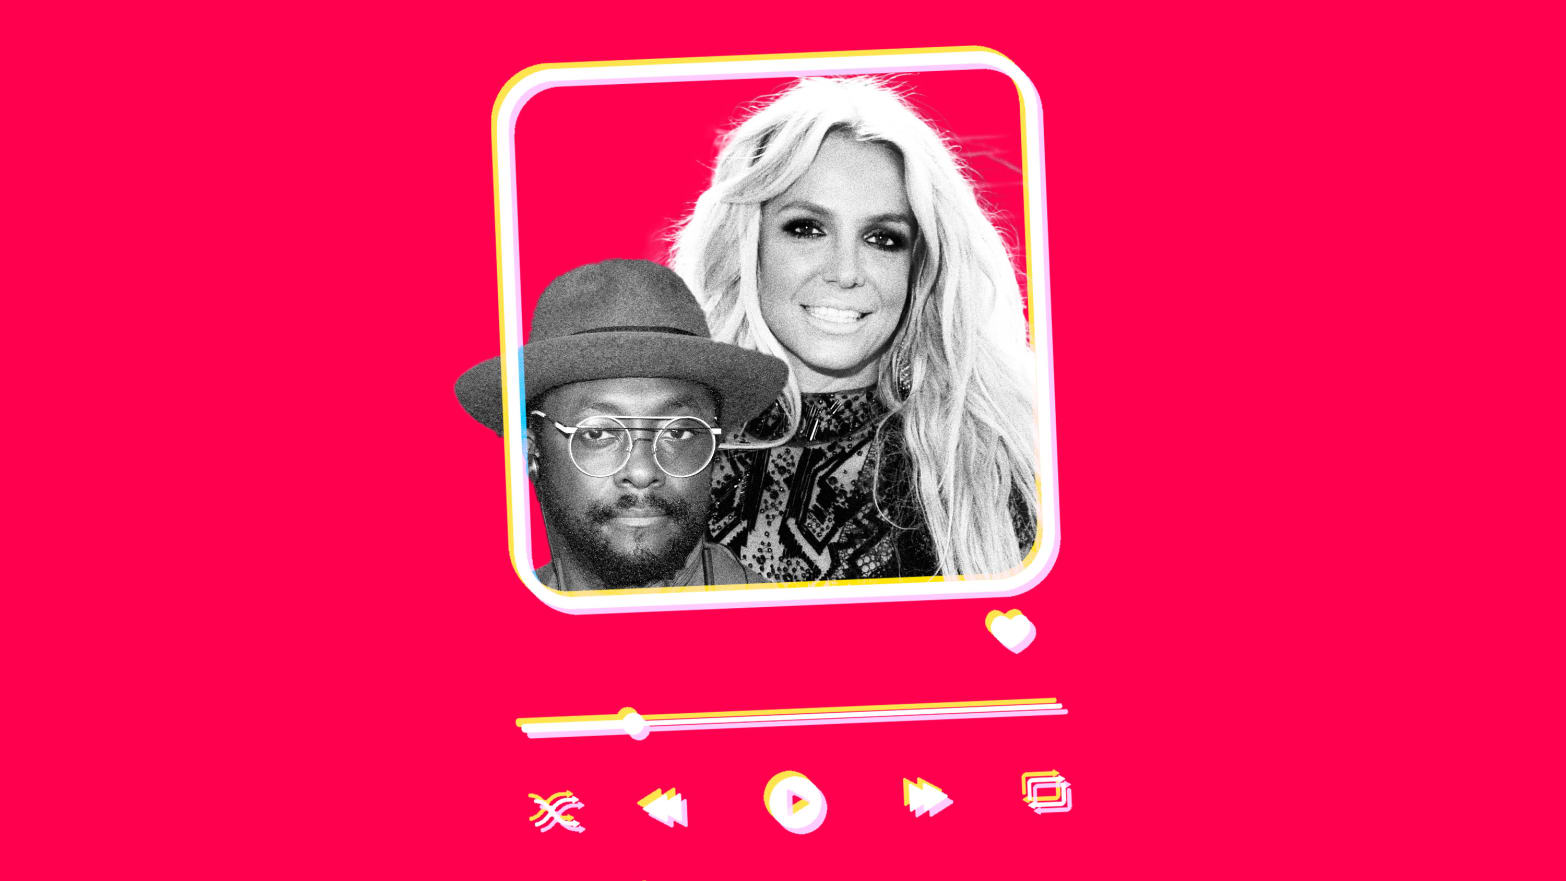 Photo illustration of Britney Spears and will.i.am on a pink background